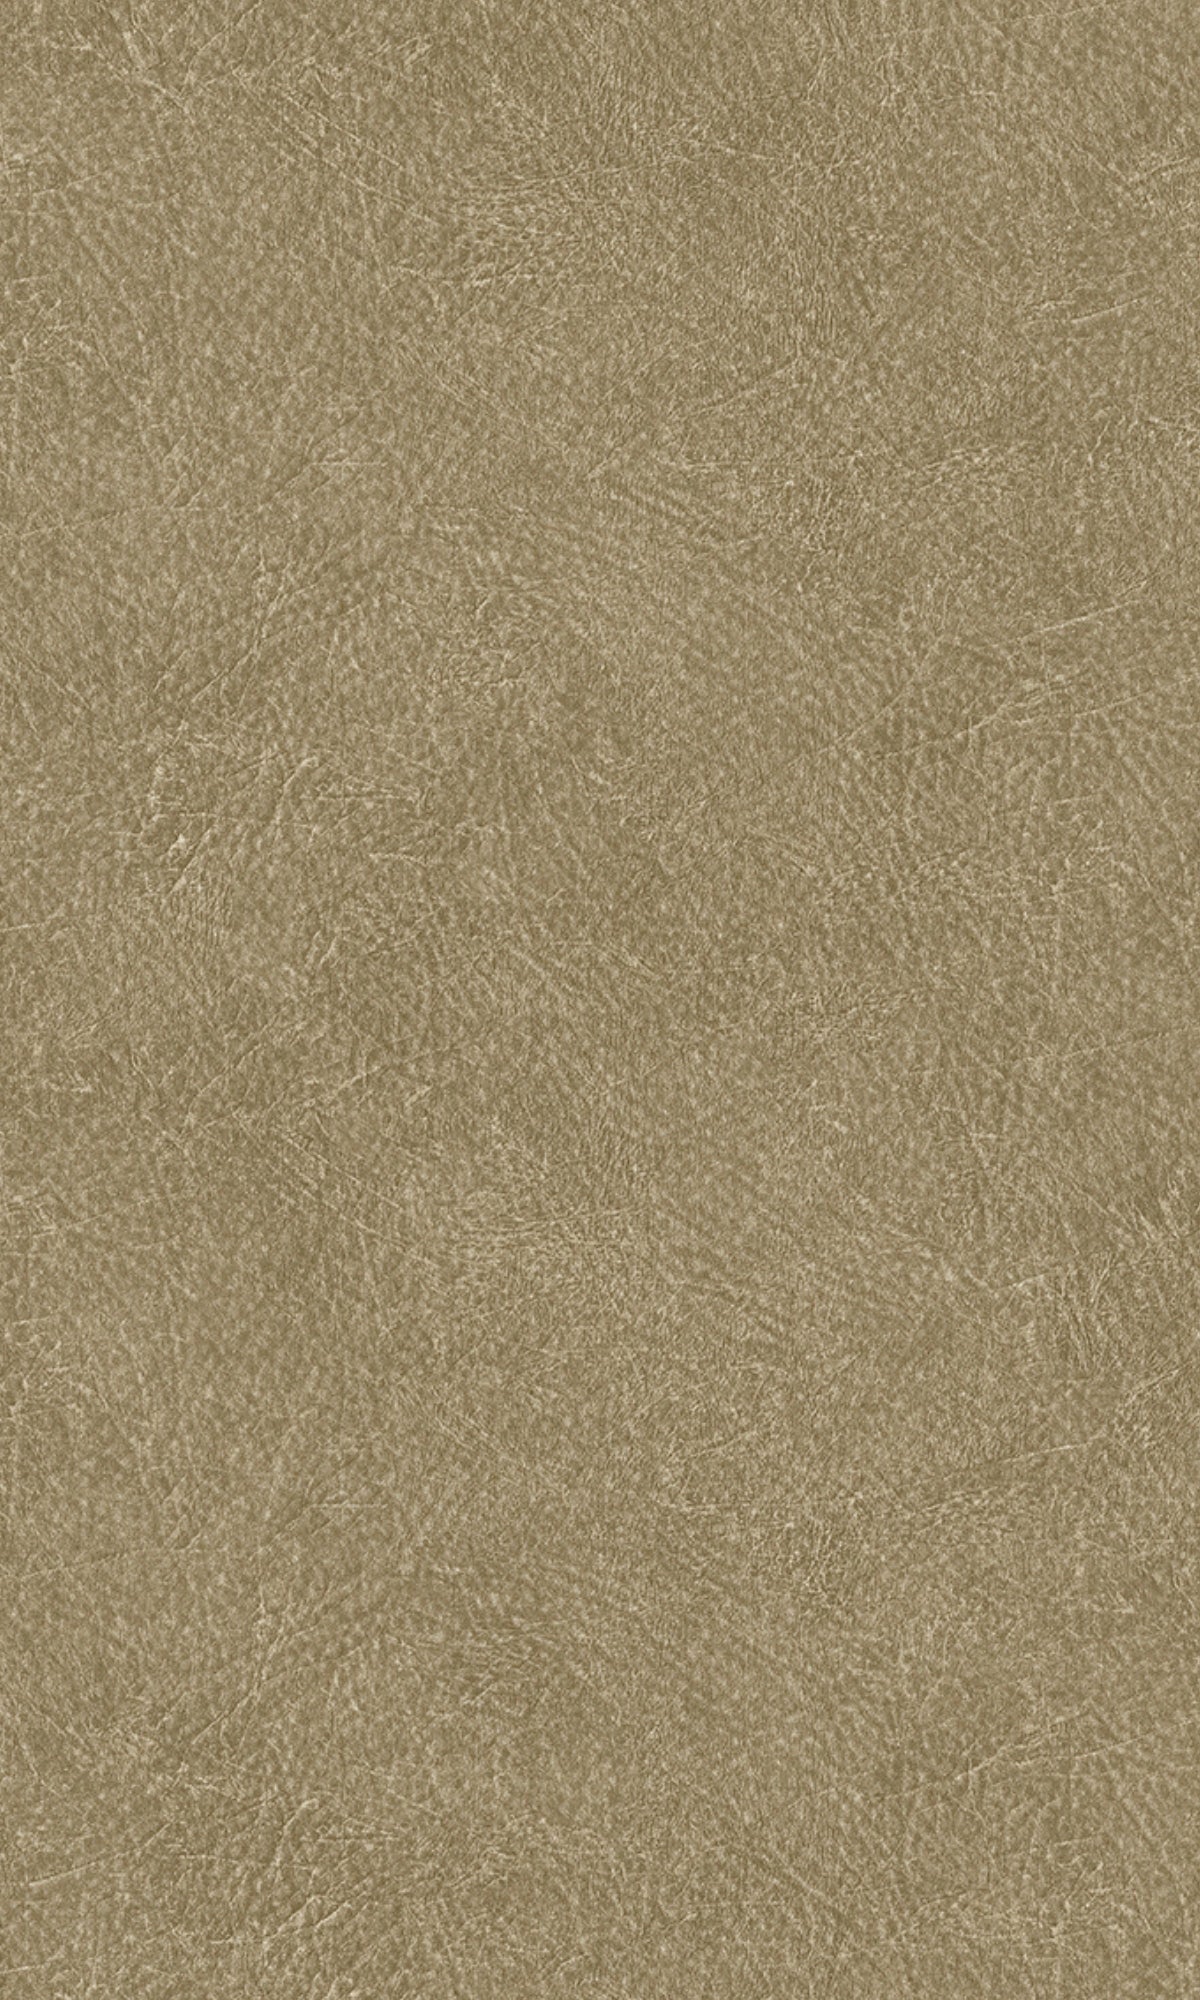 Gold Plain Leather Textured Wallpaper R8214